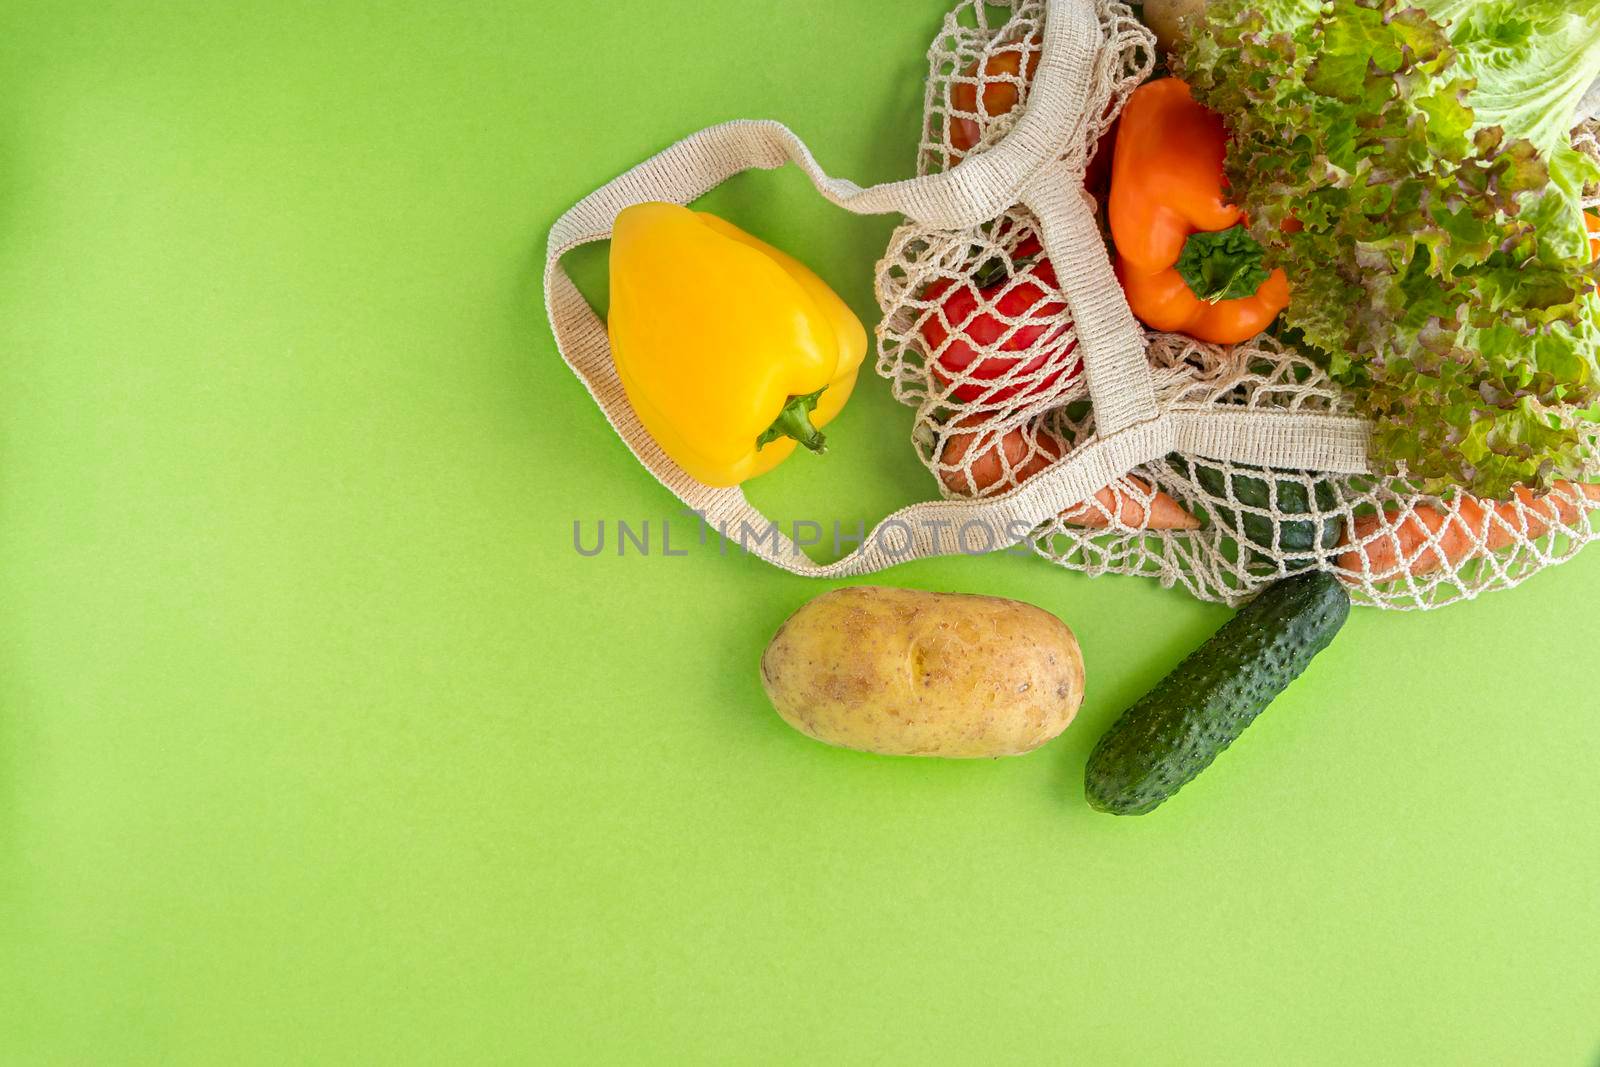 Package-free food shopping. top view of eco friendly natural bag with vegetables. Zero waste concept. Sustainable lifestyle concept. Plastic free items. Flat lay. Copy space